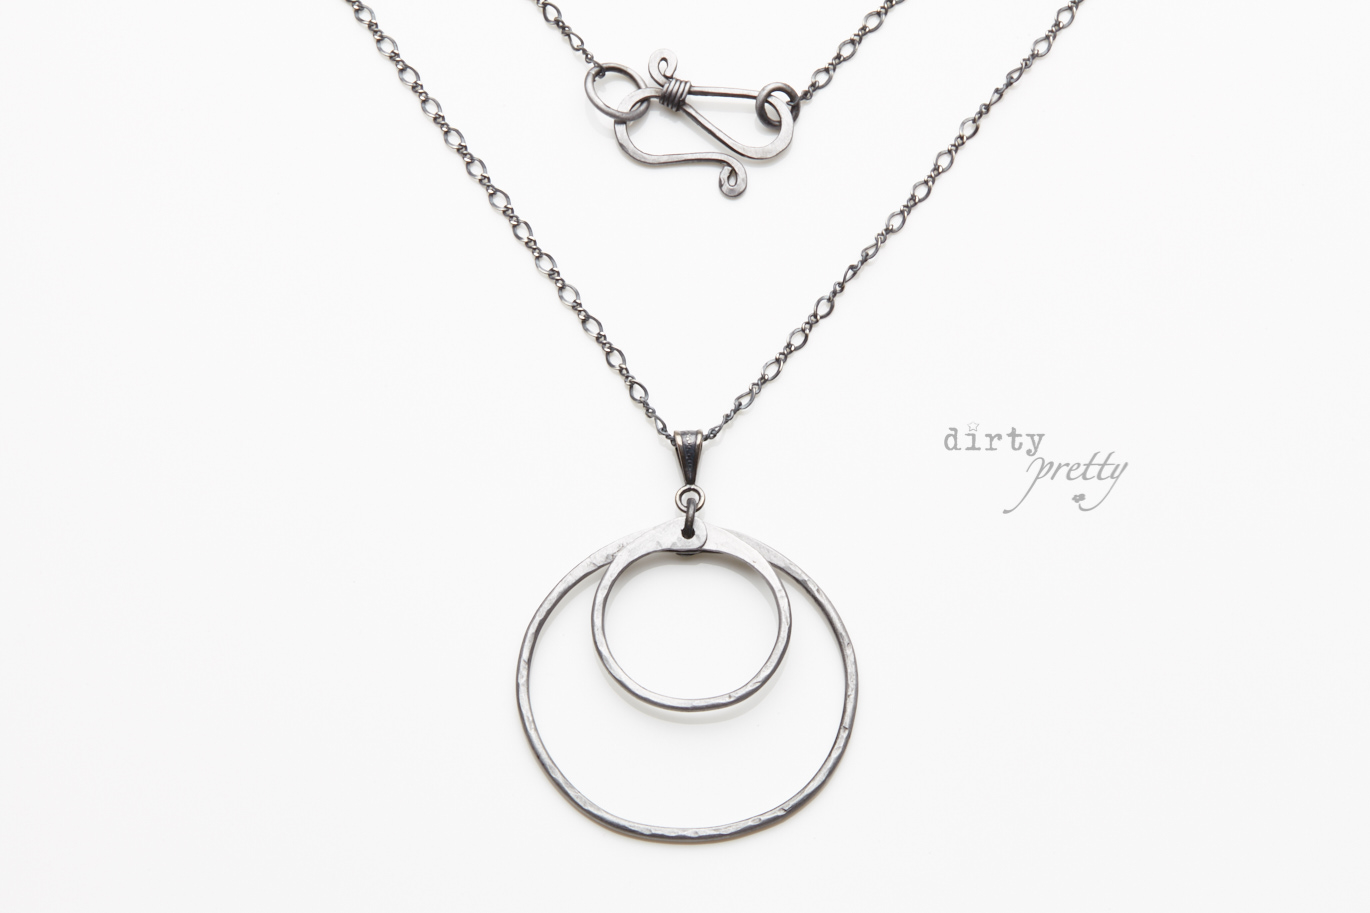 11 year anniversary gift - 11th Anniversary Ideas - Double Happiness Steel Necklace - dirtypretty artwear